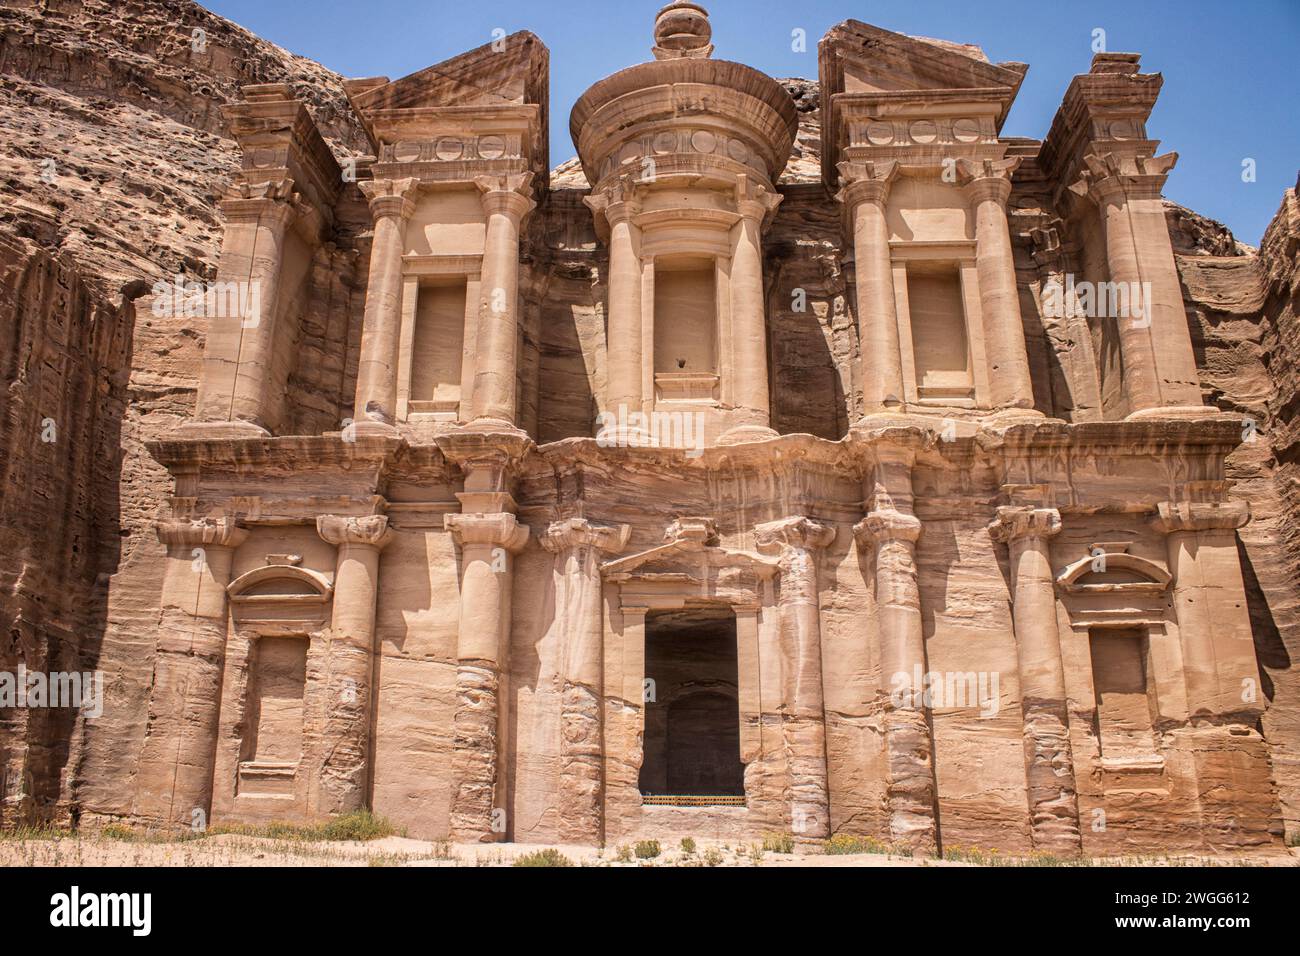 The facade of the Treasury at the UNESCO heritage site. Petra, is a historic and archaeological city in southern Jordan. Famous for its rock-cut architecture and water conduit system, Petra is also called the 'Rose City' because of the colour of the sandstone from which it is carved. It is adjacent to the mountain of Jabal Al-Madbah, in a basin surrounded by mountains forming the eastern flank of the Arabah valley running from the Dead Sea to the Gulf of Aqaba. Access to the city is through a famously picturesque gorge called the Siq, which leads directly to the Khazneh. Jordon. Stock Photo